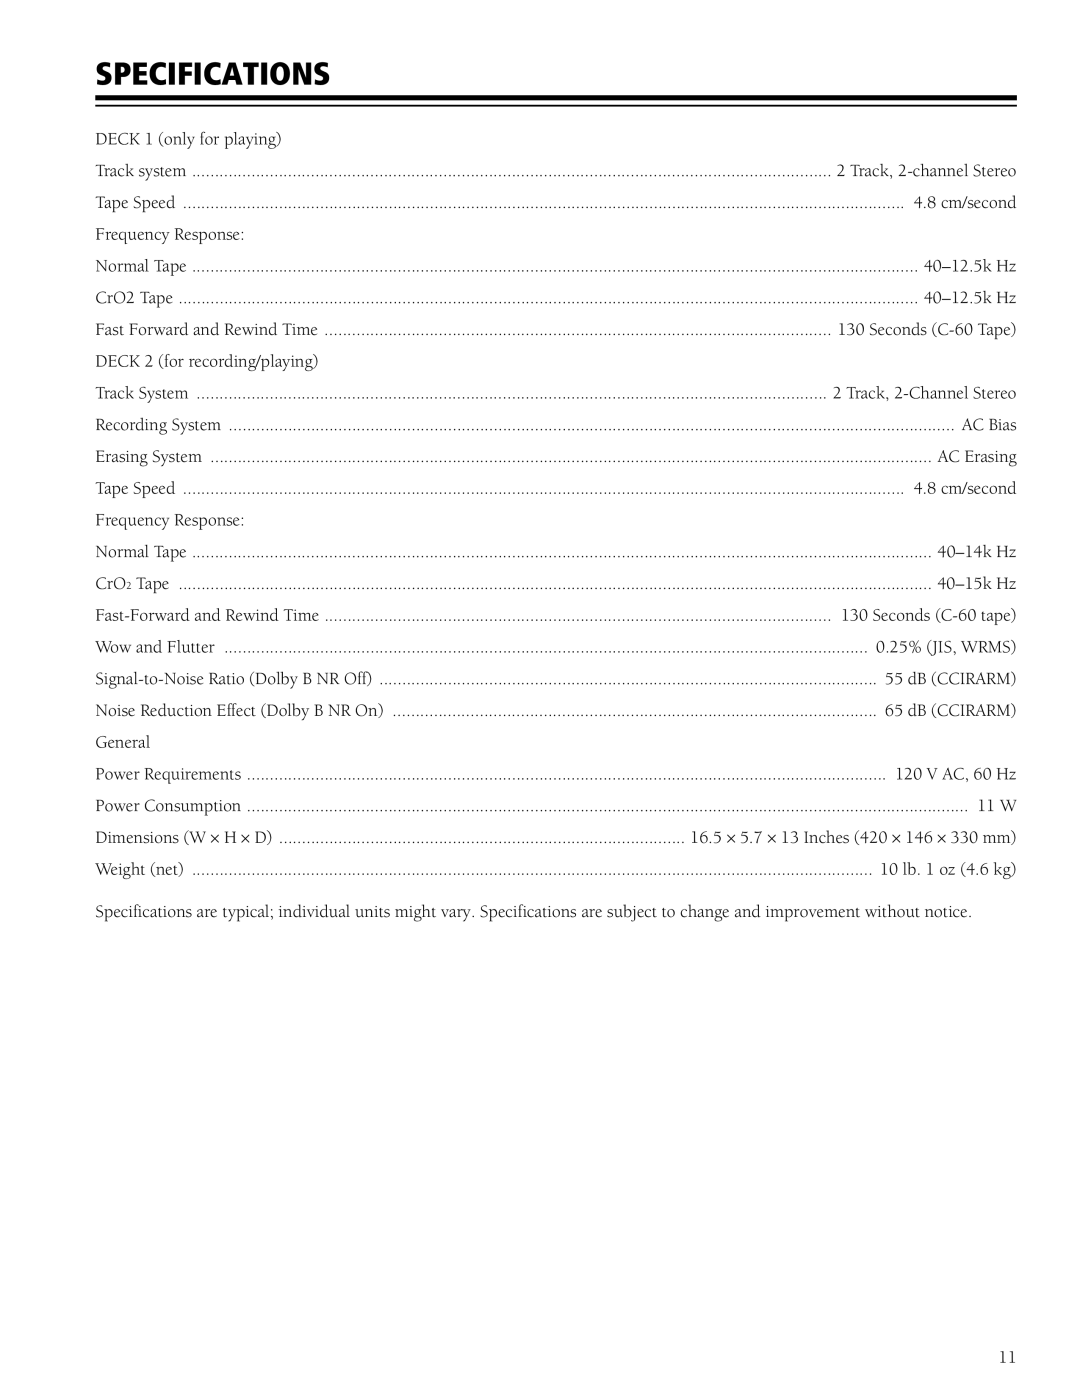 RCA SCT-520 manual Specifications 